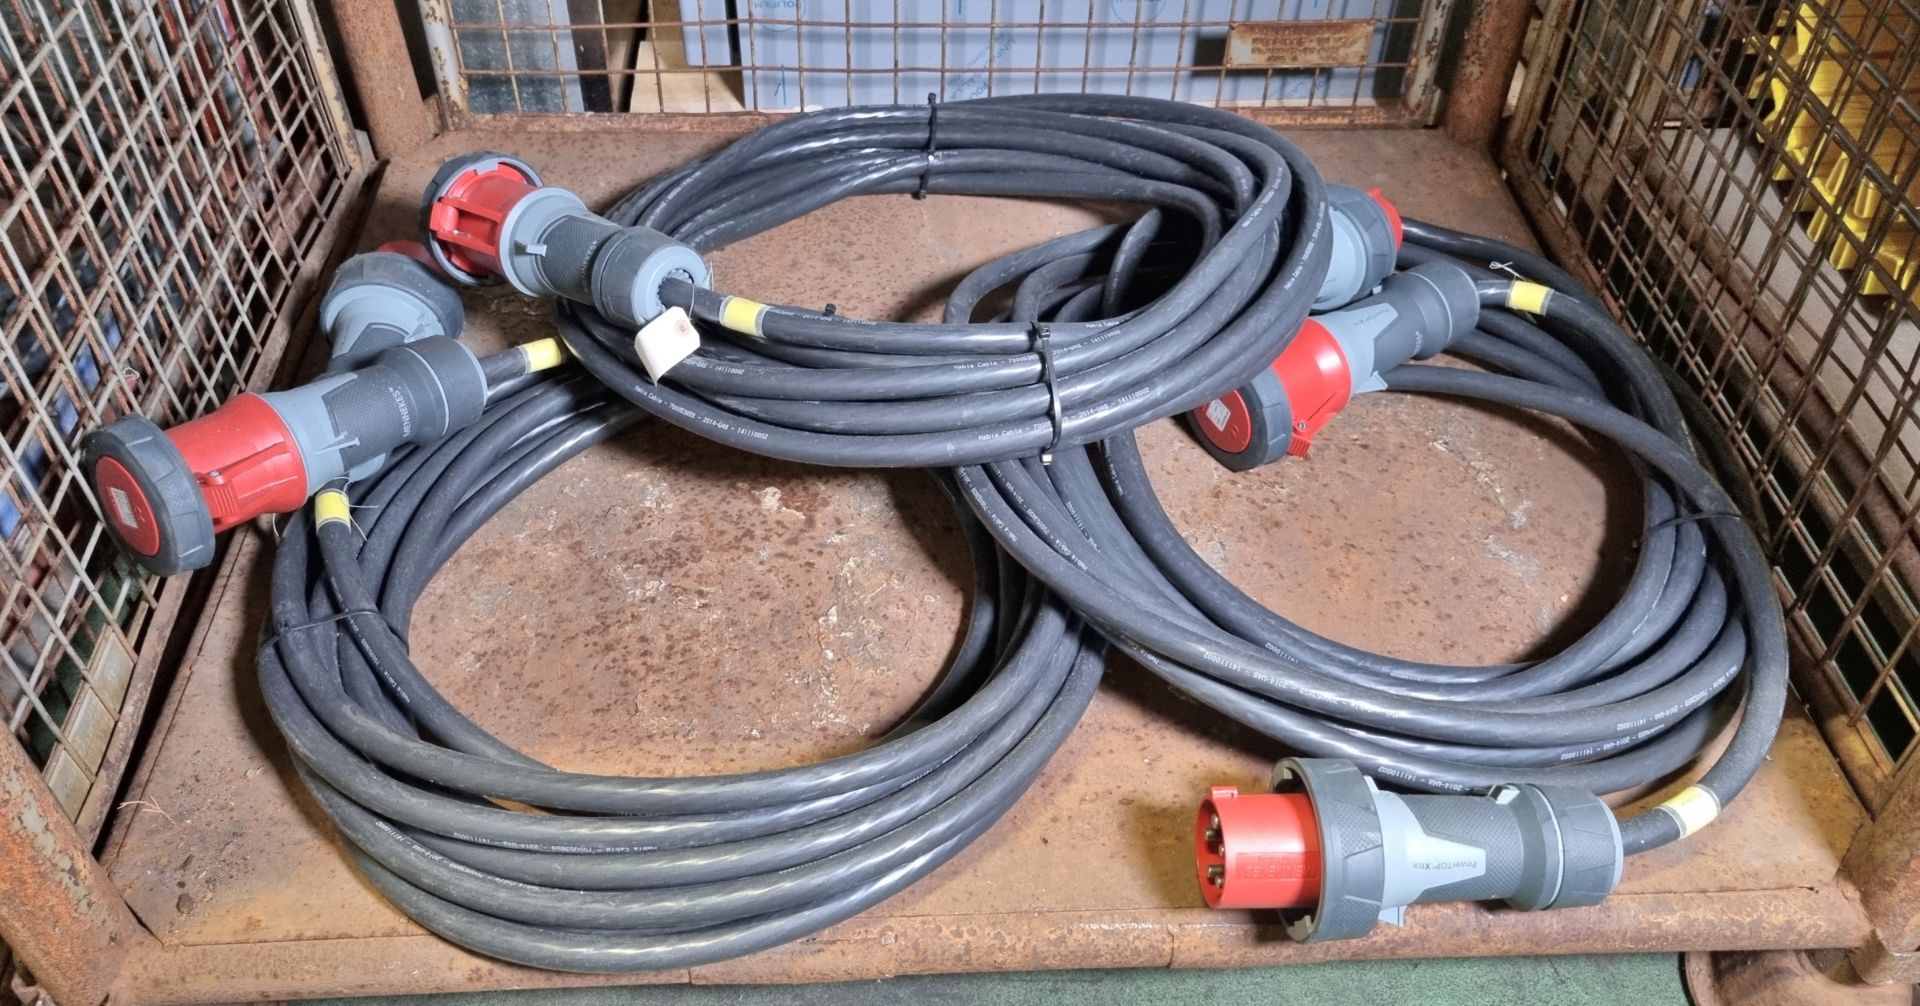 3x Mennekes 125a 400vac 3 Phase Power Harness heavy duty cables 10m